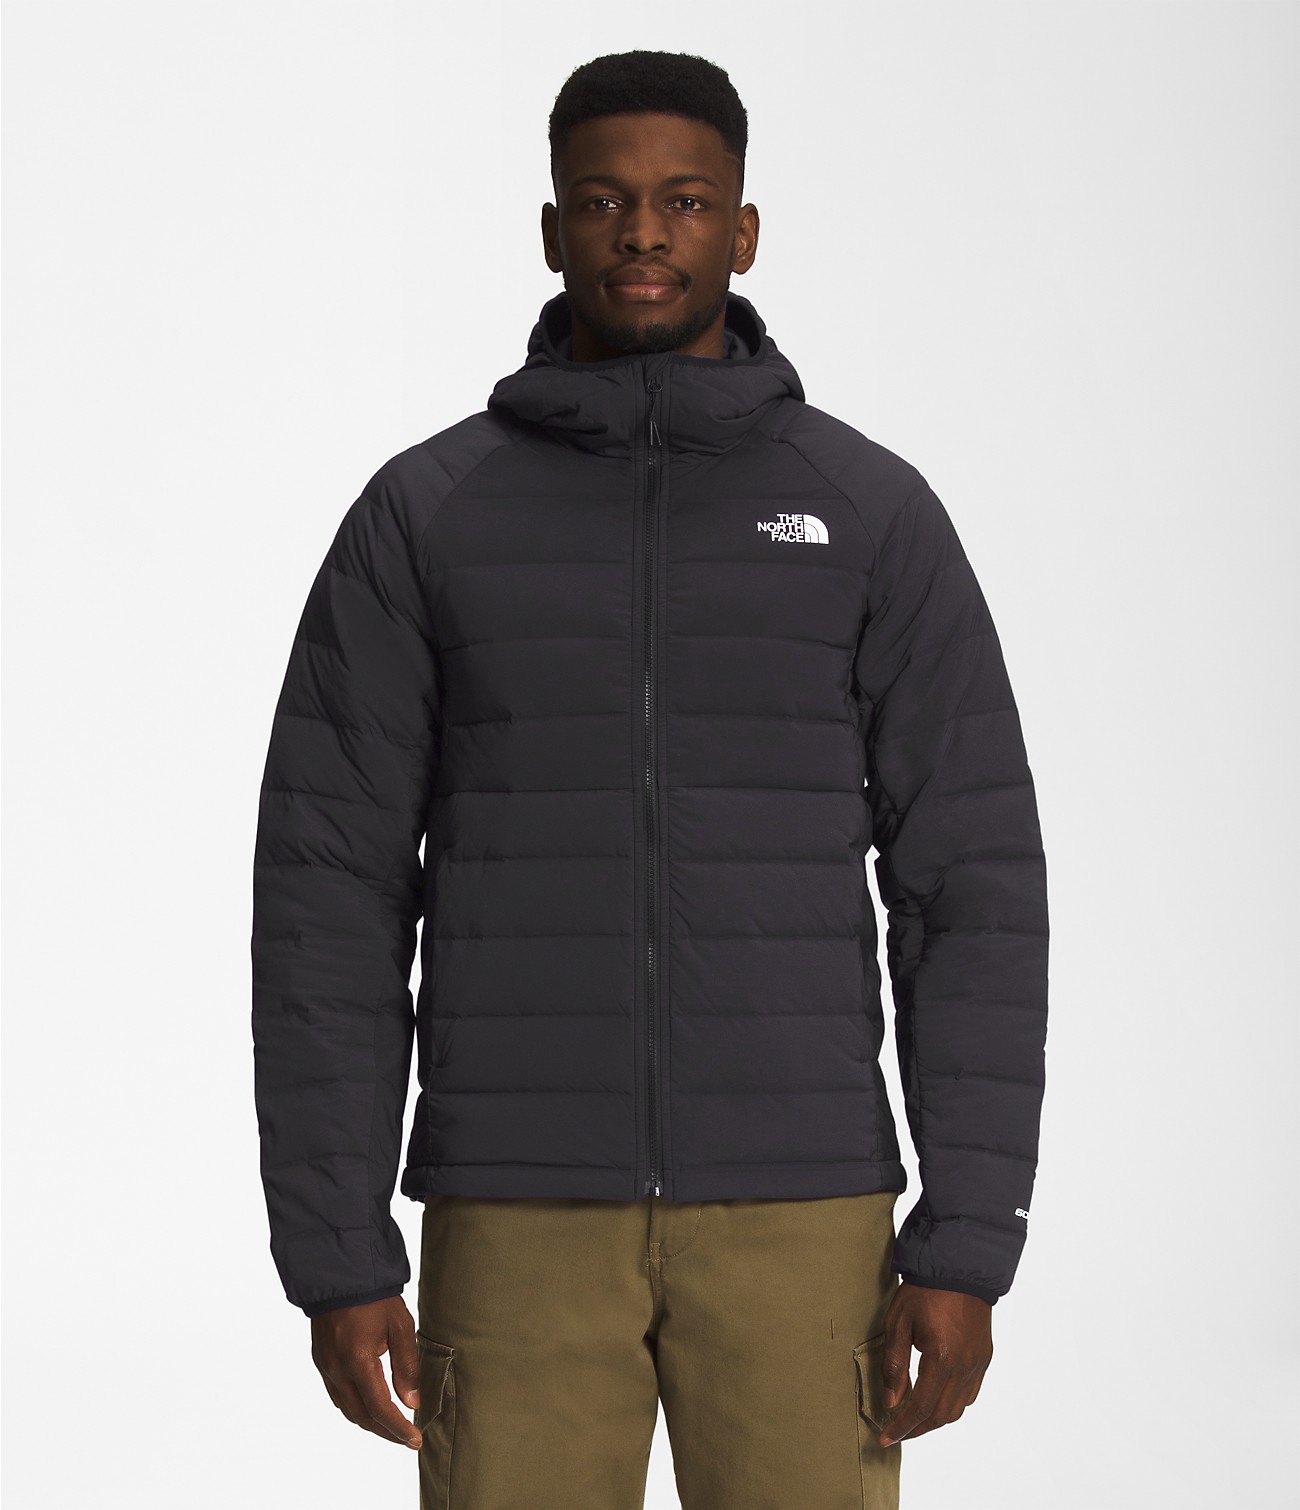 Unlock Wilderness' choice in the KÜHL Vs North Face comparison, the Belleview Stretch Down Hoodie by The North Face